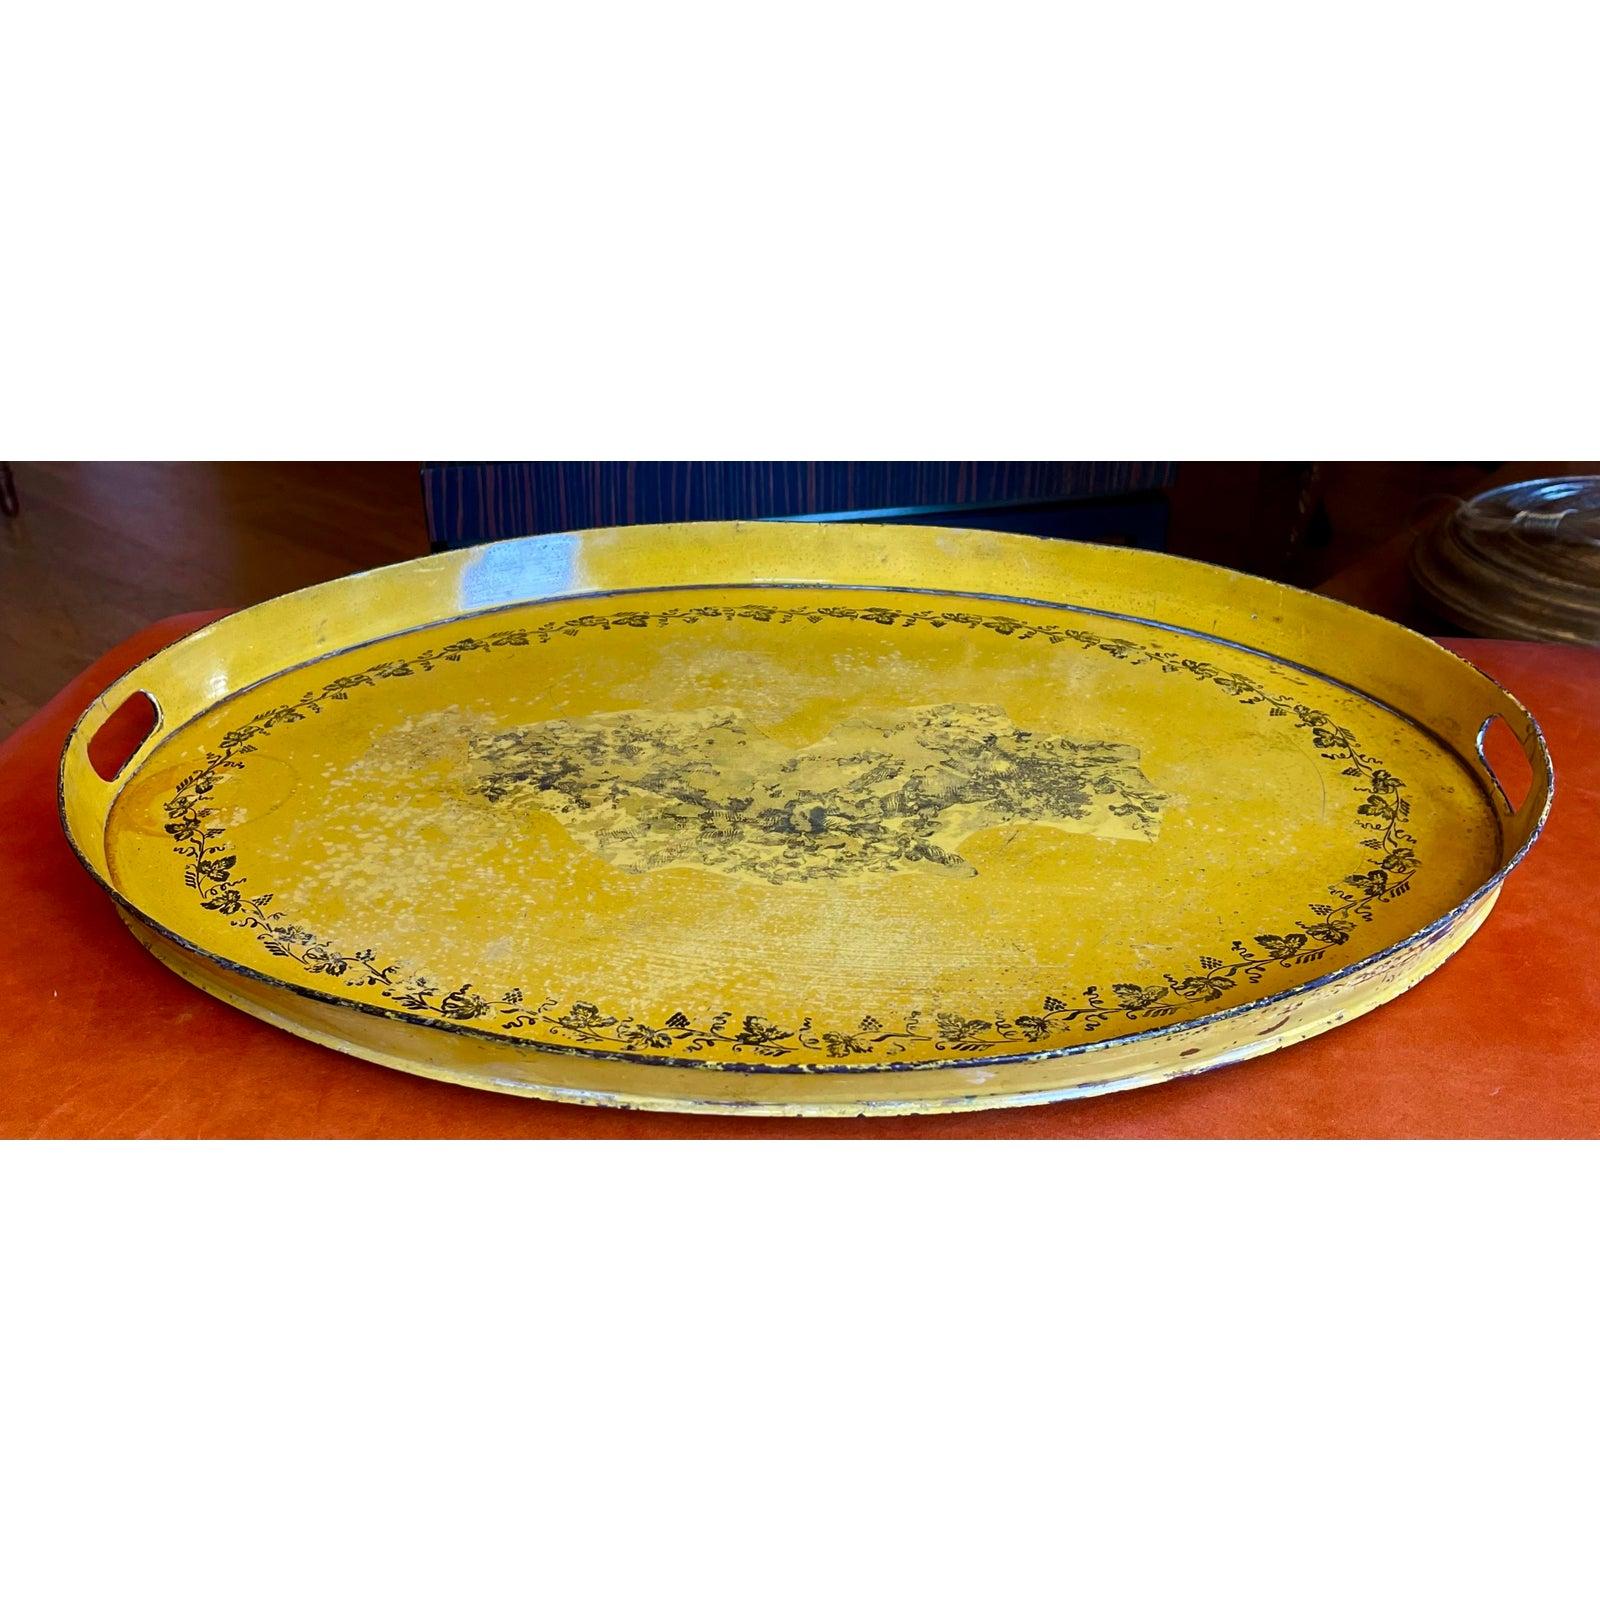 Antique Regency yellow & black tole platter tray

Additional information:
Materials: Tole
Color: Yellow
Period: 19th Century
Styles: Regency 
Item Type: Vintage, Antique or Pre-owned
Dimensions: 20